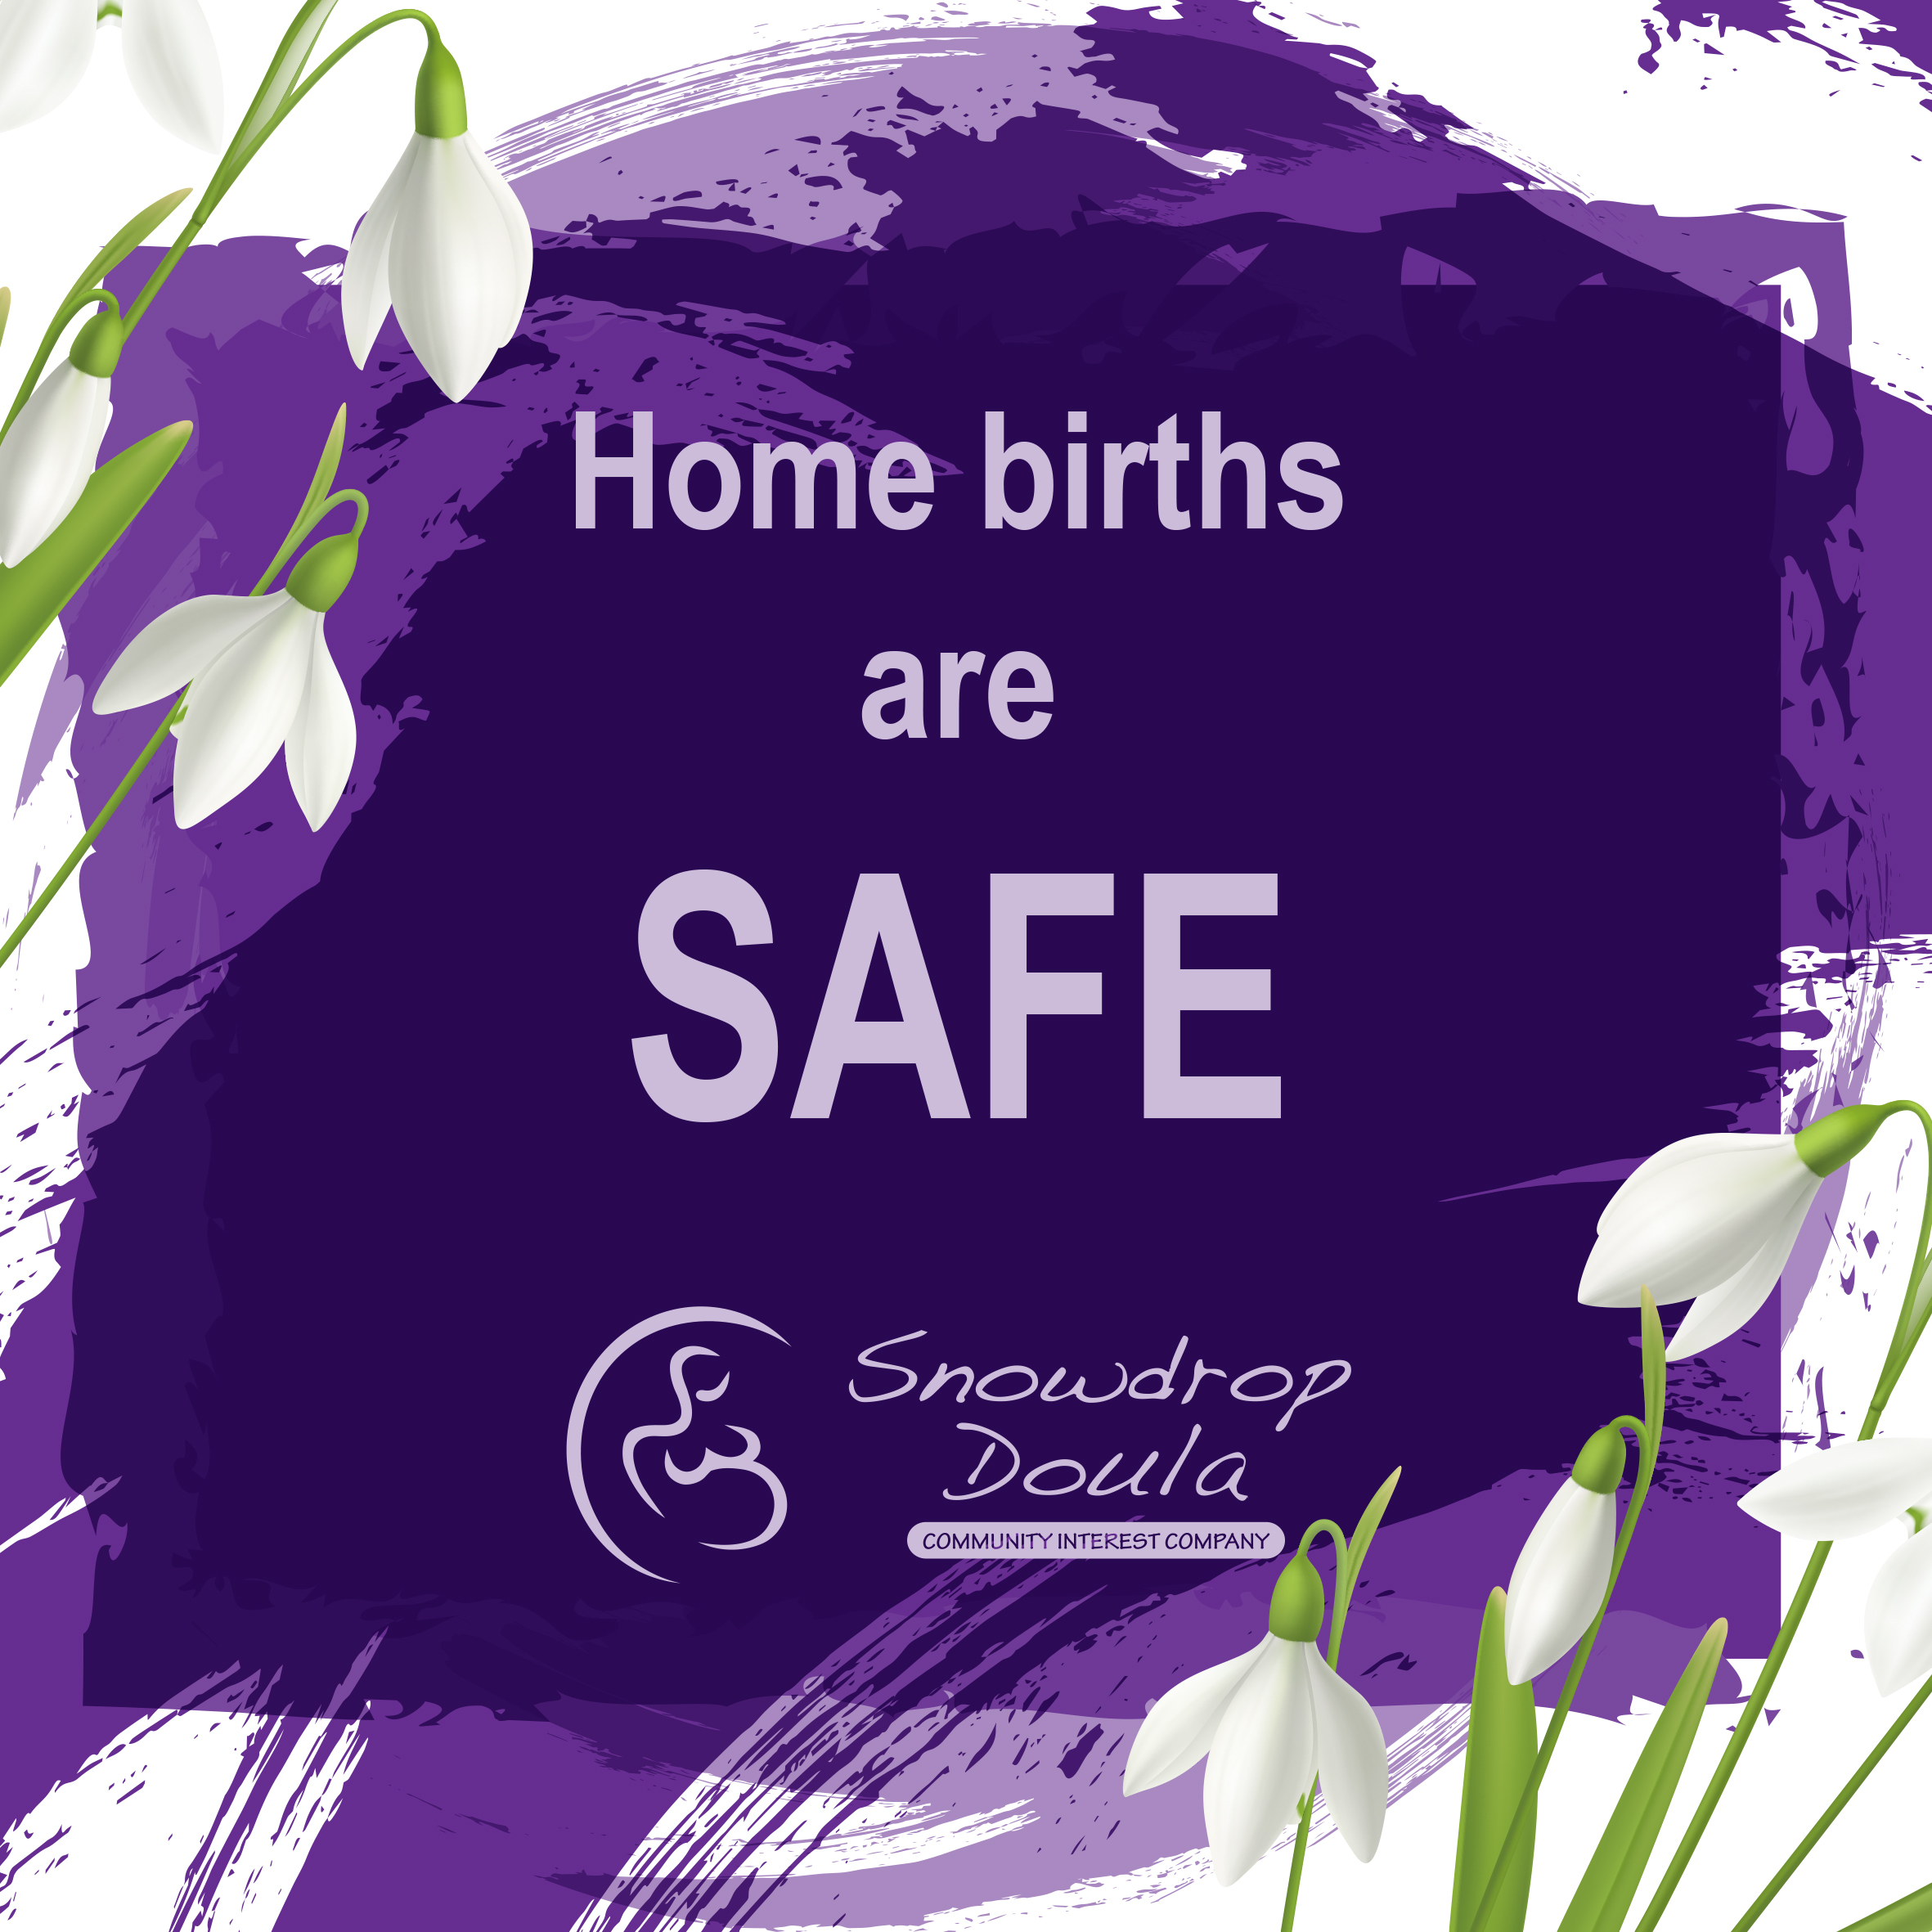 Home births are safe